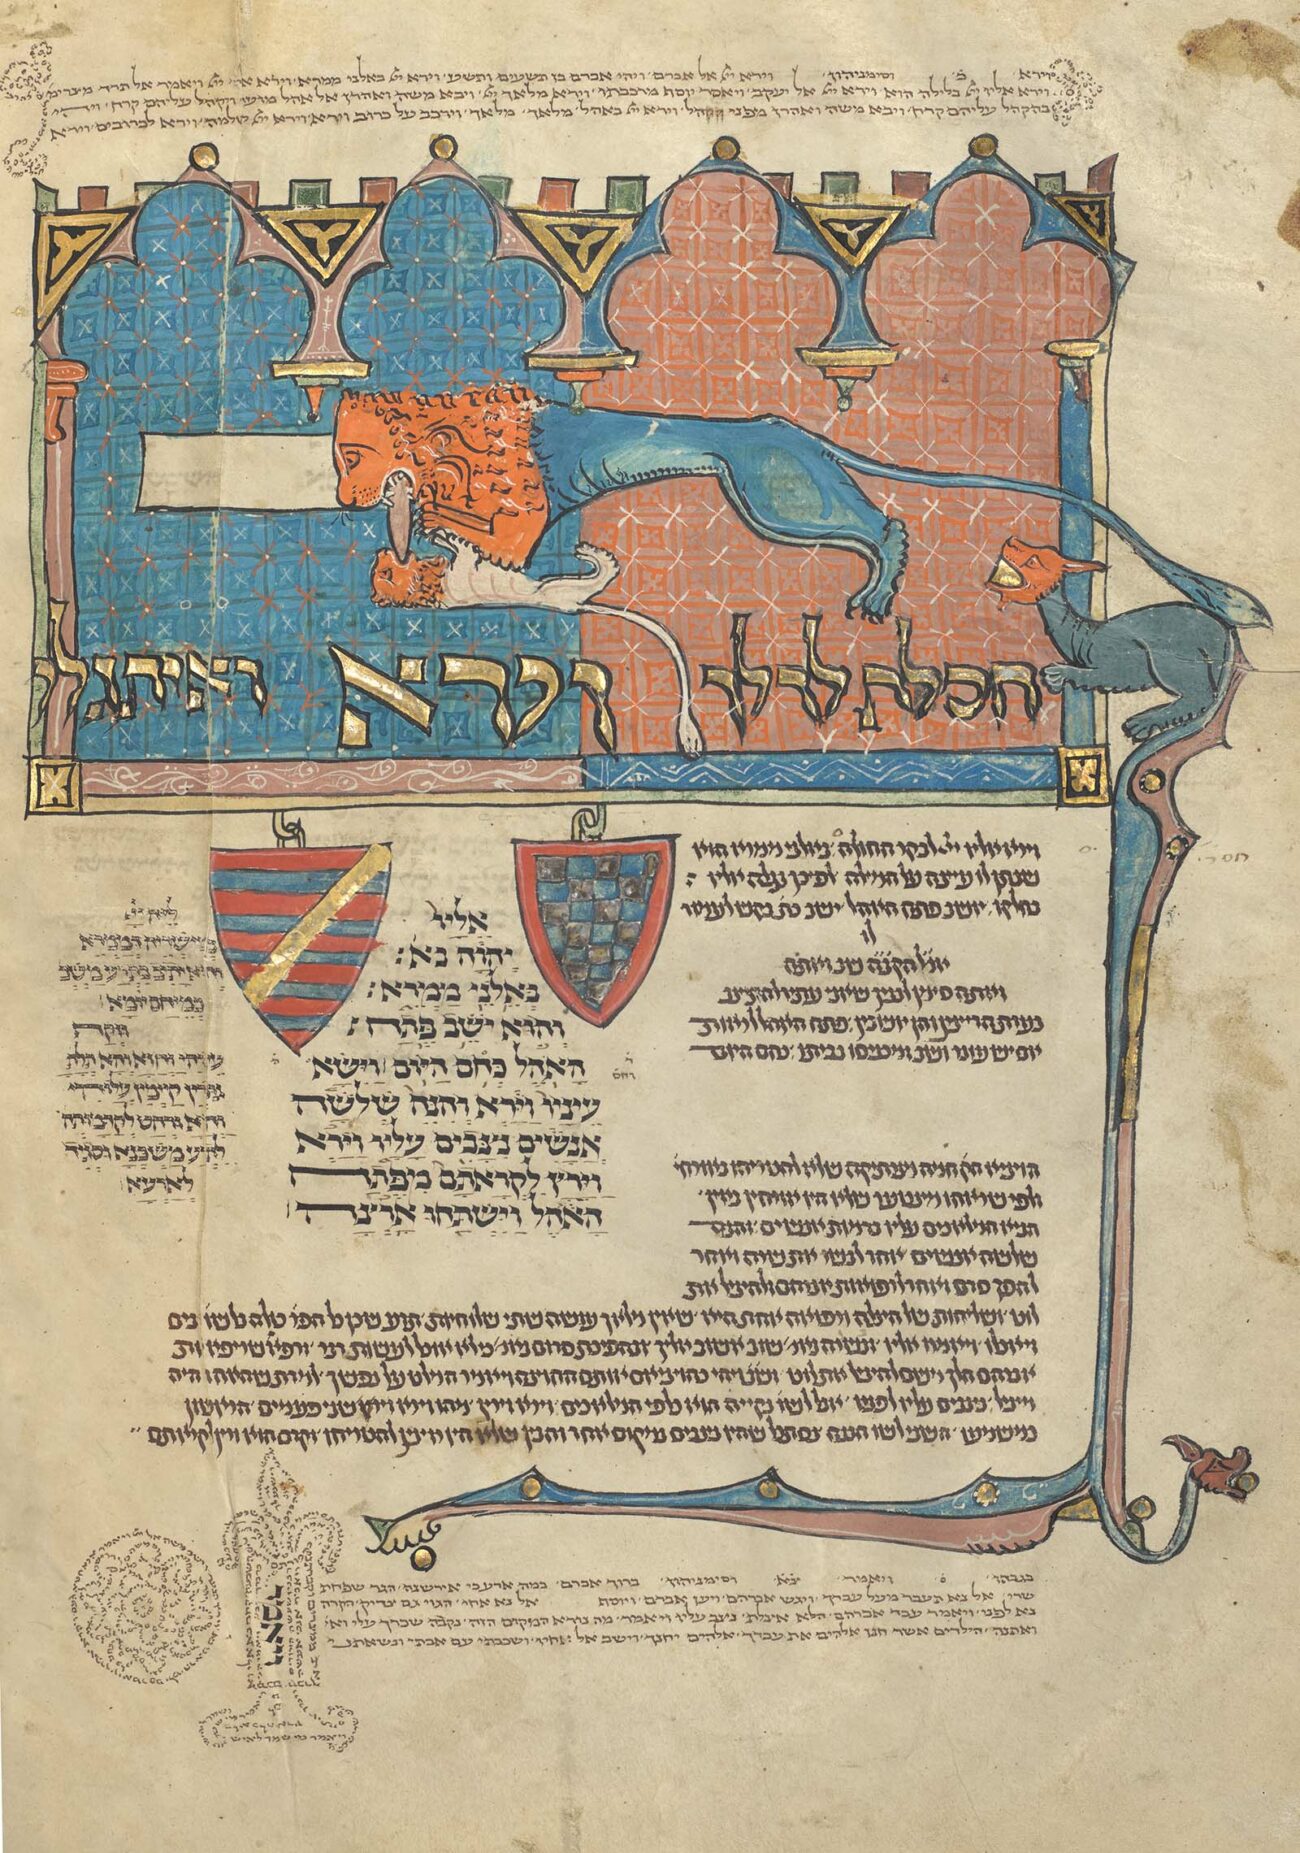 Lion in the Rothschild Pentateuch, 1296, unknown illuminator, made in France and Germany, tempera colors, gold, and ink, 10 13/16 × 8 1/4 inches (The J. Paul Getty Museum, Acquired with the generous support of Jo Carole and Ronald S. Lauder, Ms. 116 (2018.43), fol. 32v. Digital image courtesy of the Getty’s Open Content Program)